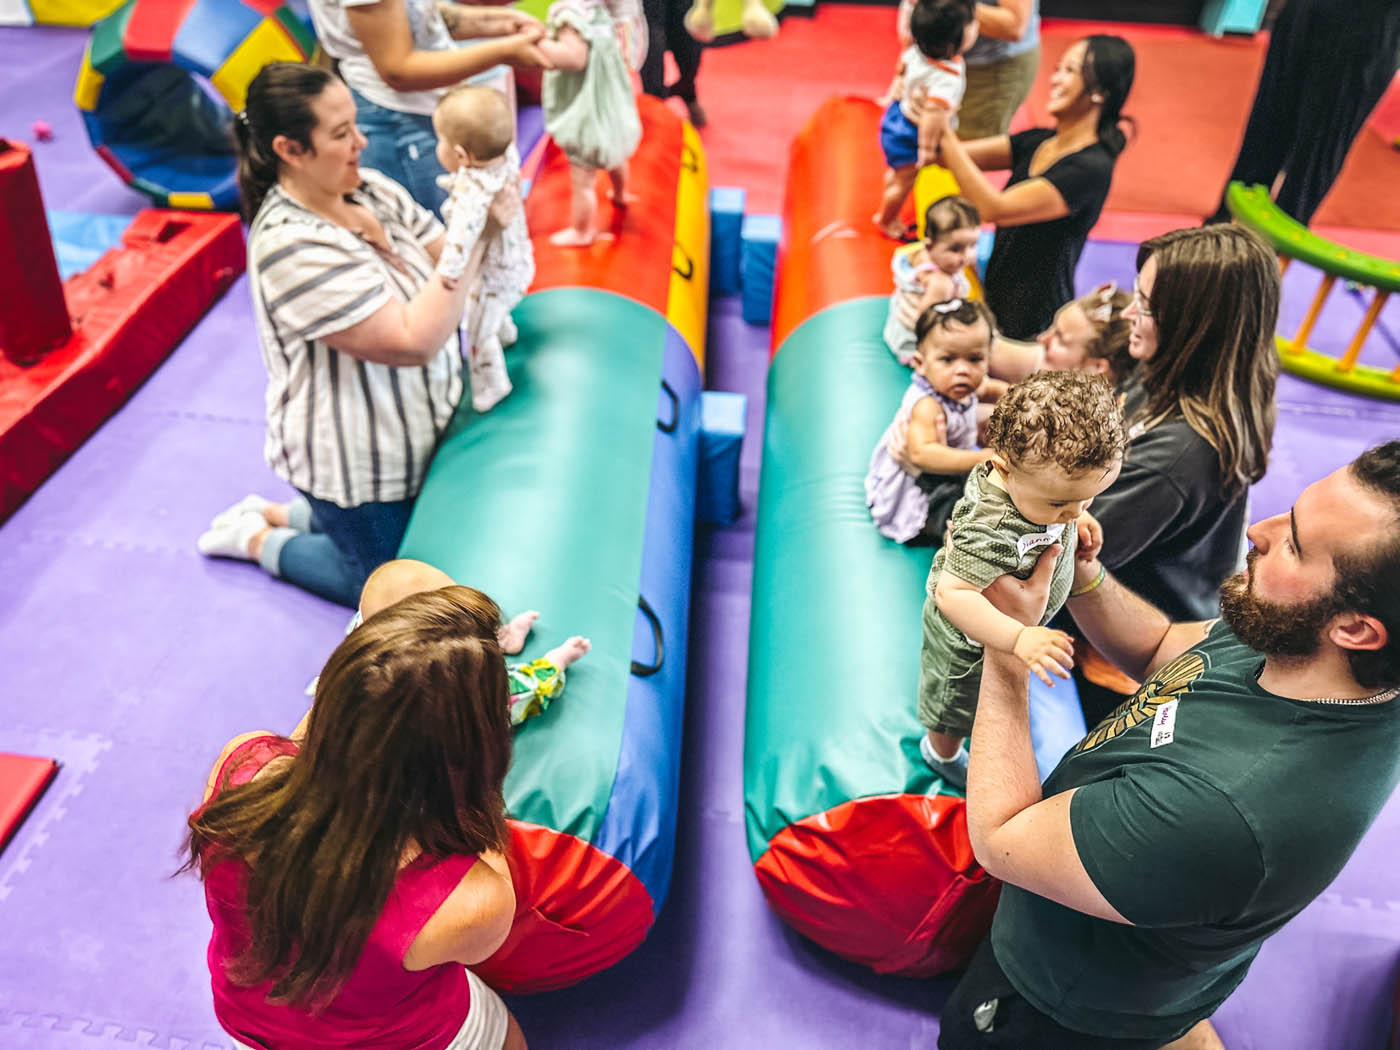 A group of parent and children enjoying Romp n' Roll Northwest Charlotte's gym, review our frequently asked questions at Romp n' Roll Northwest Charlotte.